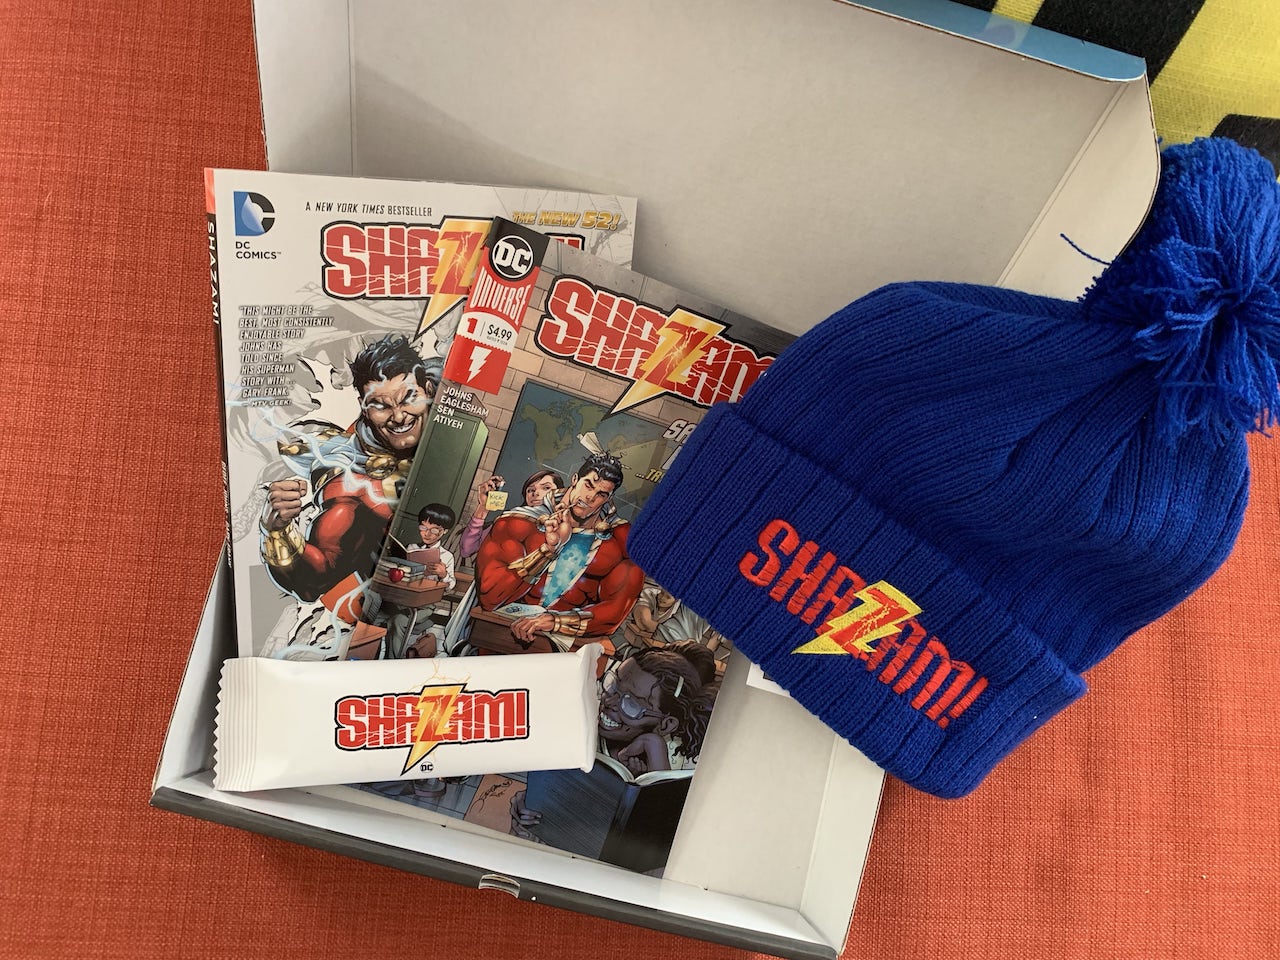 First Look: DC Comics gets into the Shazam! spirit with press gift box